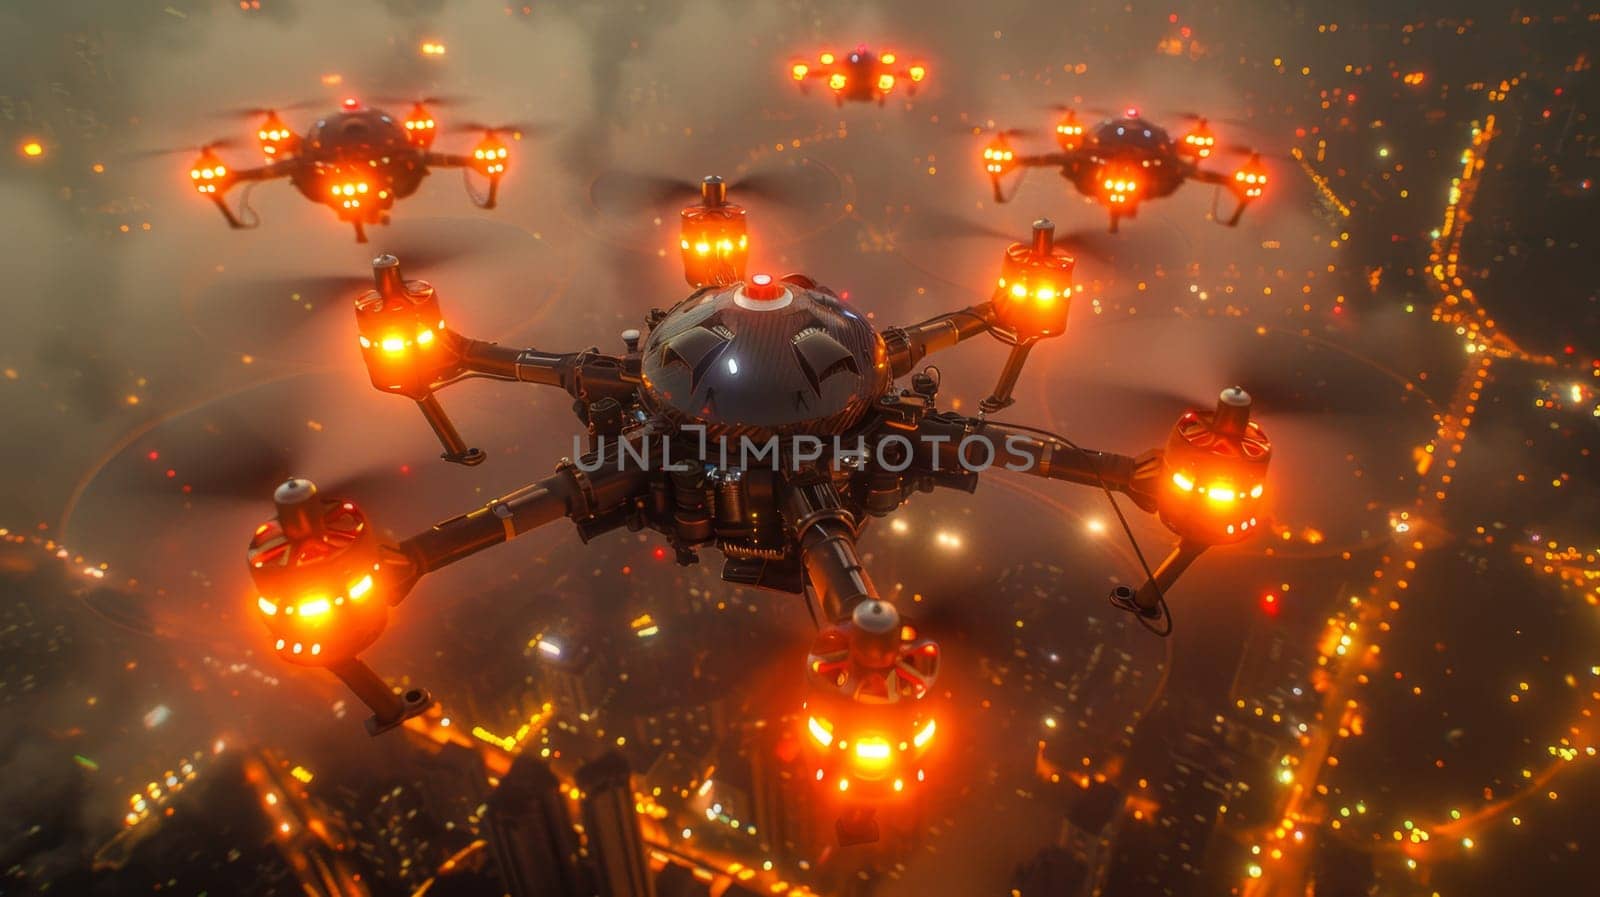 A squadron of unmanned aerial vehicles patrols over the evening city by Lobachad